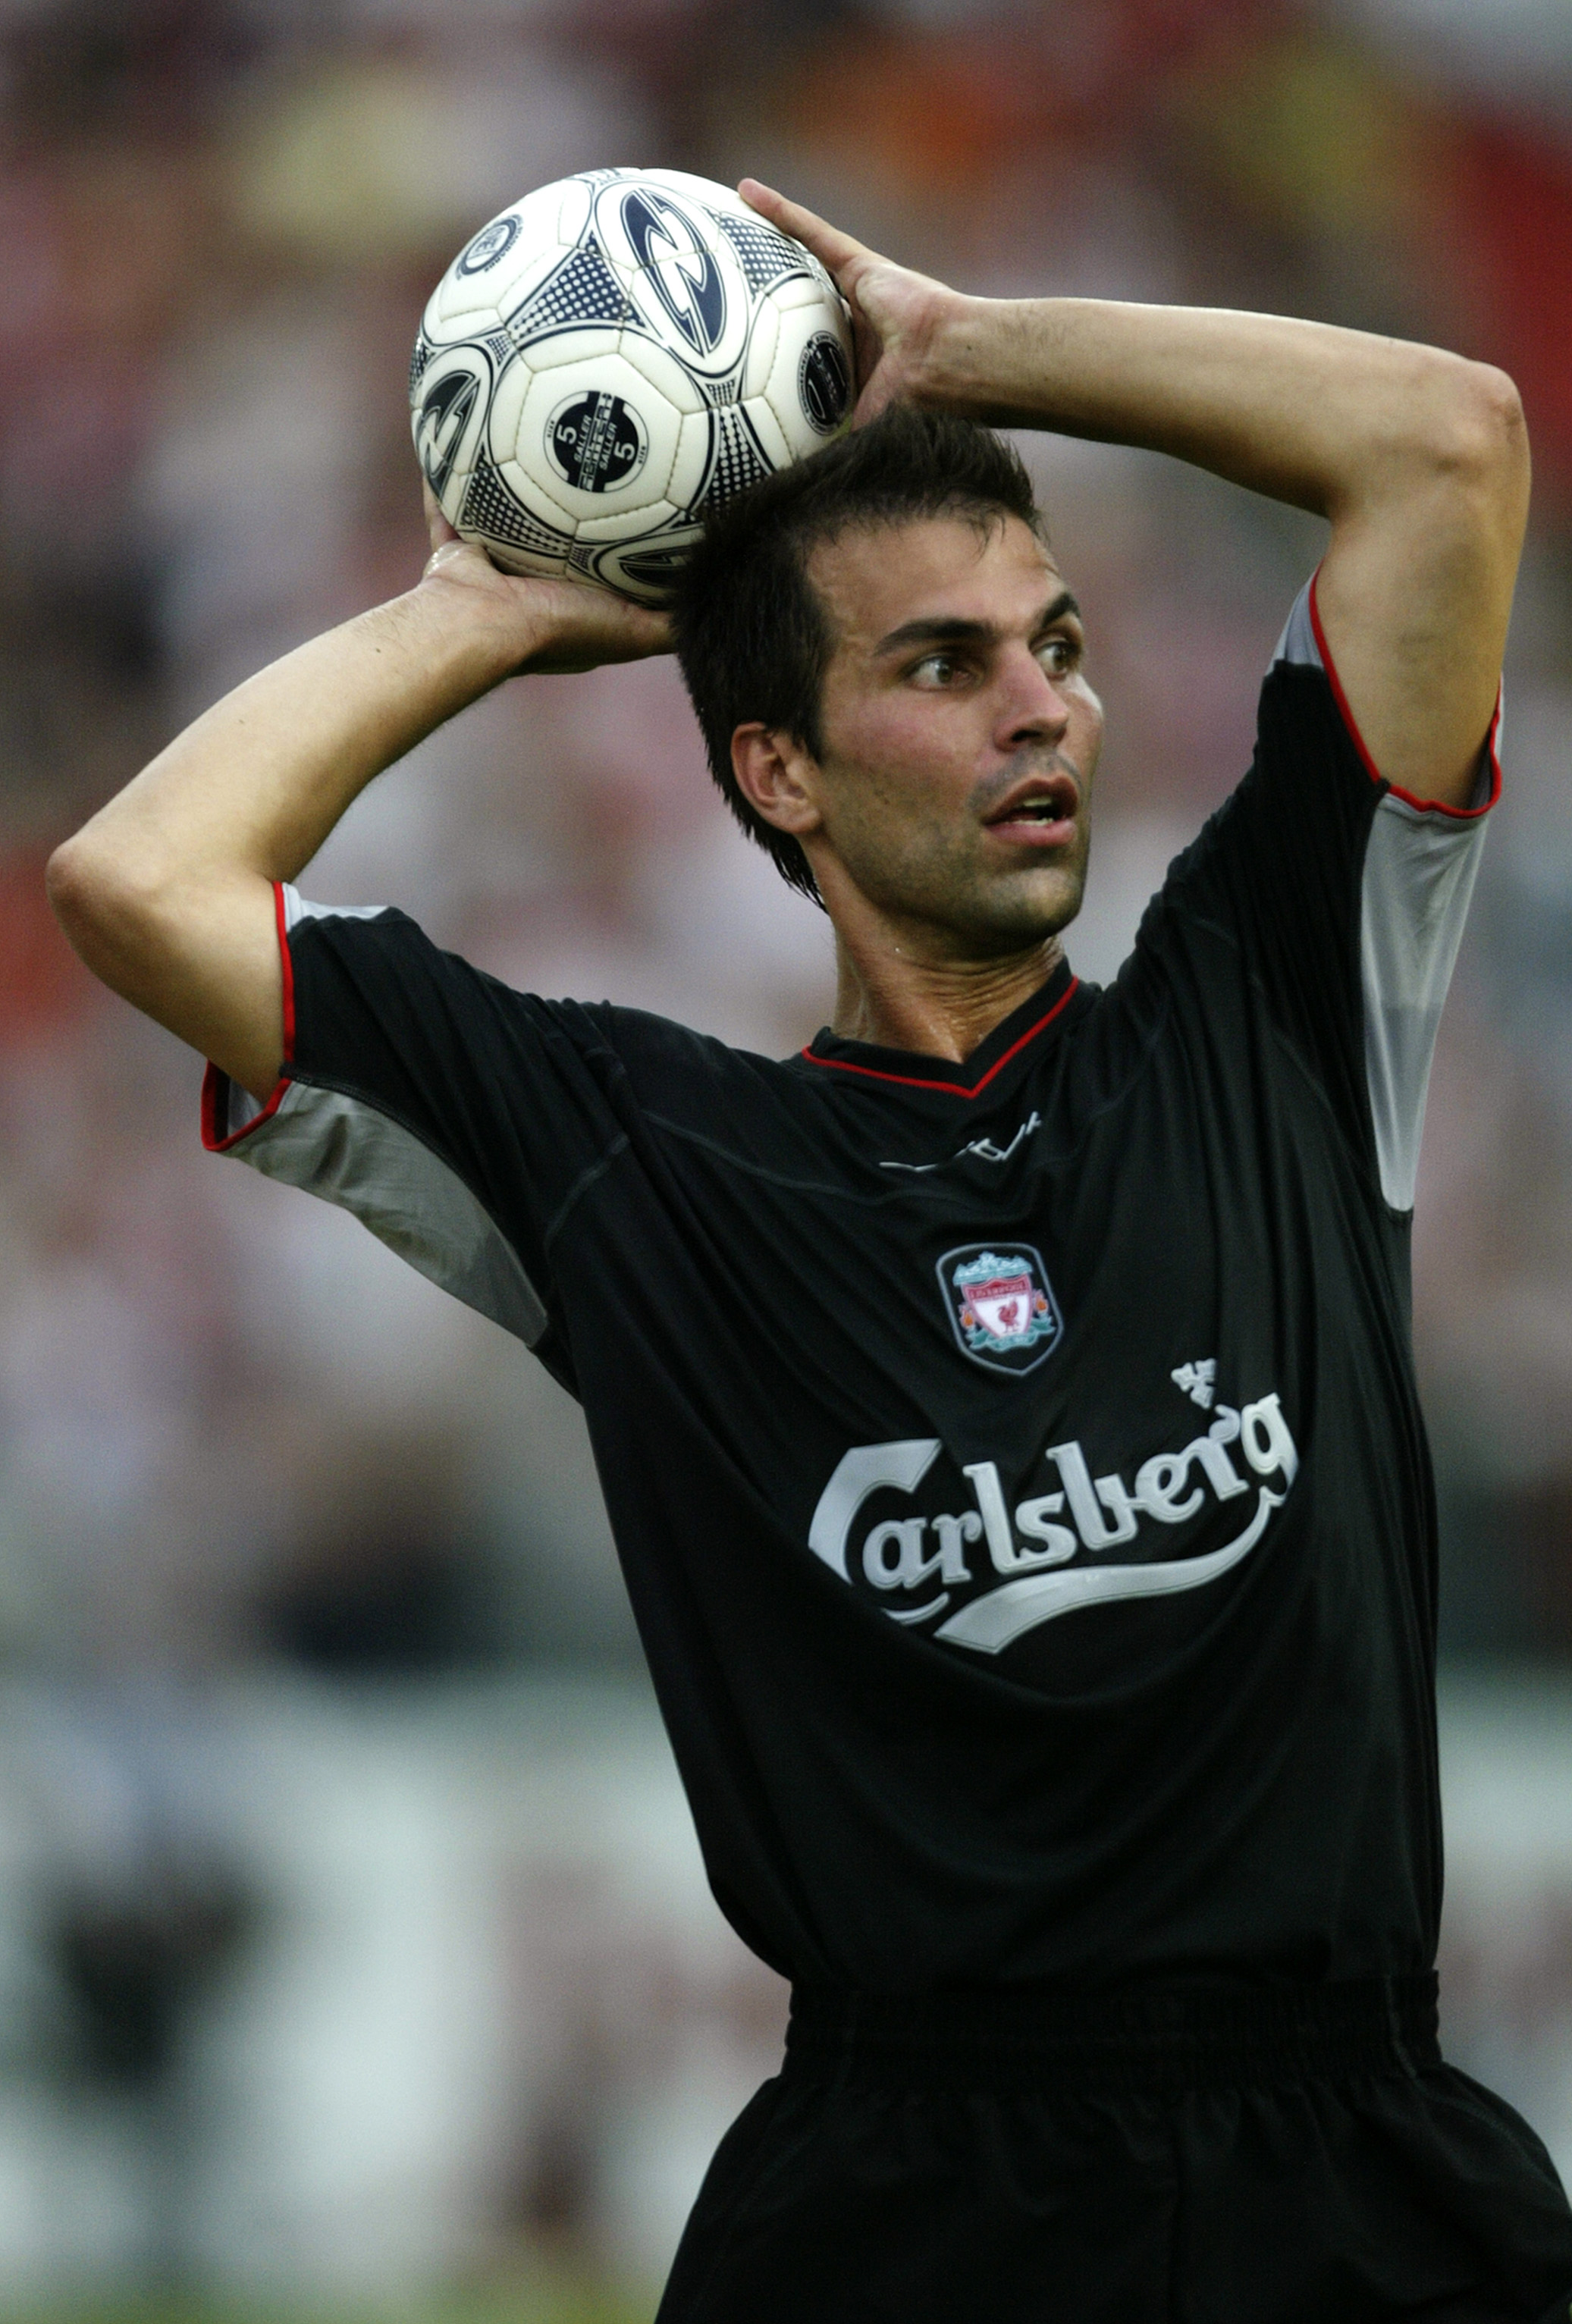 COLOGNE - JULY 16:  Markus Babbel of Liverpool takes a throw on during the friendly match between FC Cologne and Liverpool at The Rhein Energie Stadium on July 16, 2003 in Cologne, Germany.  Liverpool won the match 3-1.  (Photo by Stuart Franklin/Getty Im